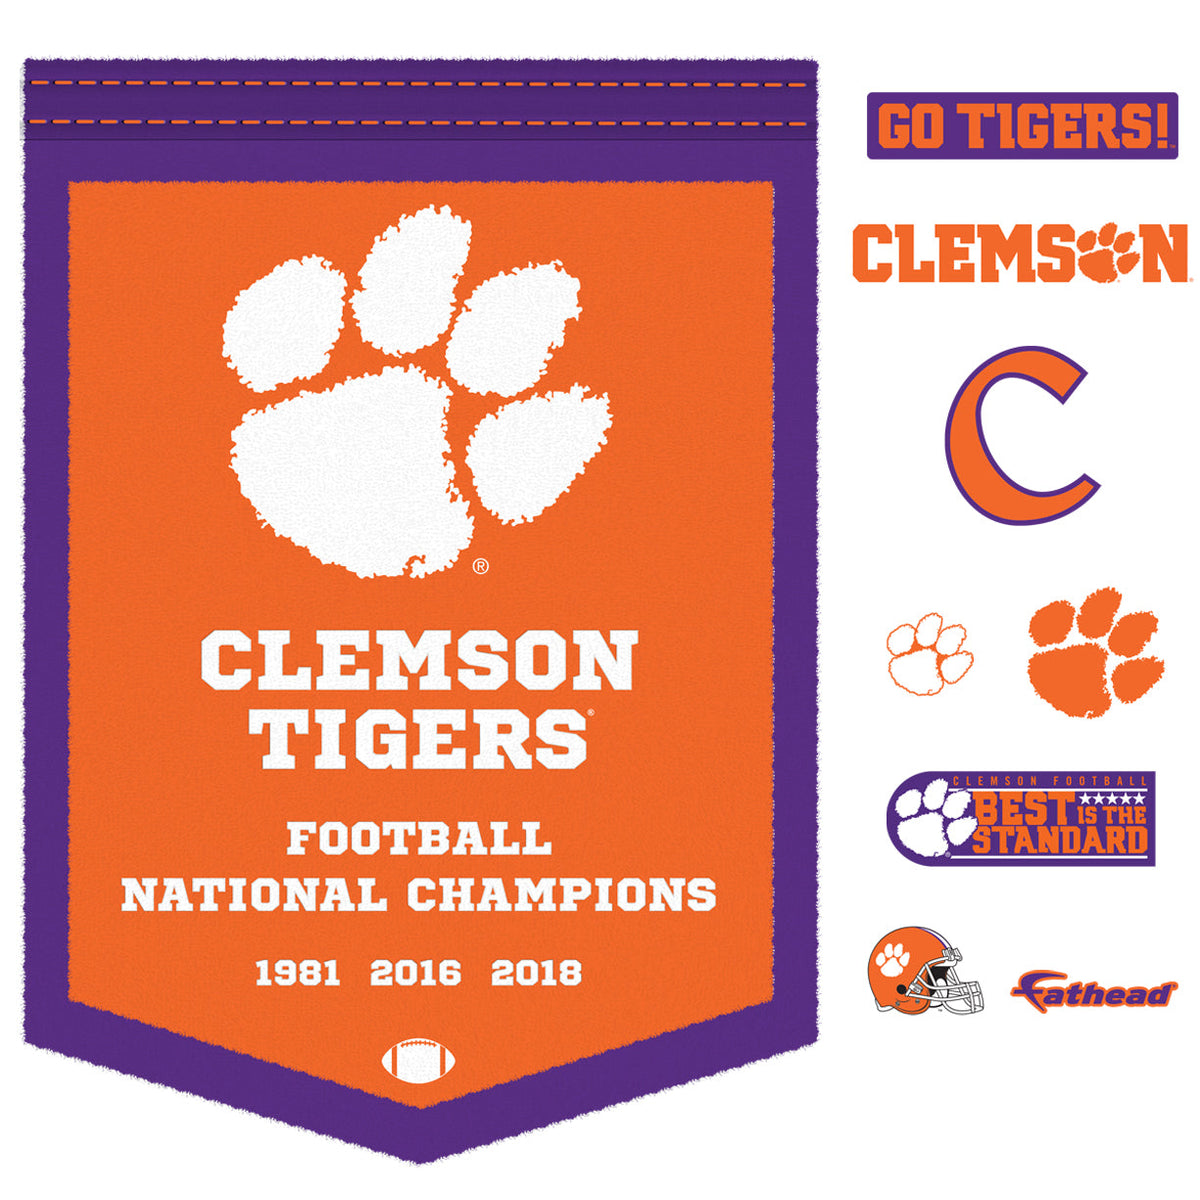 Clemson Tigers: Clemson Tigers 2021 Football Championships Banner        - Officially Licensed NCAA Removable Wall   Adhesive Decal